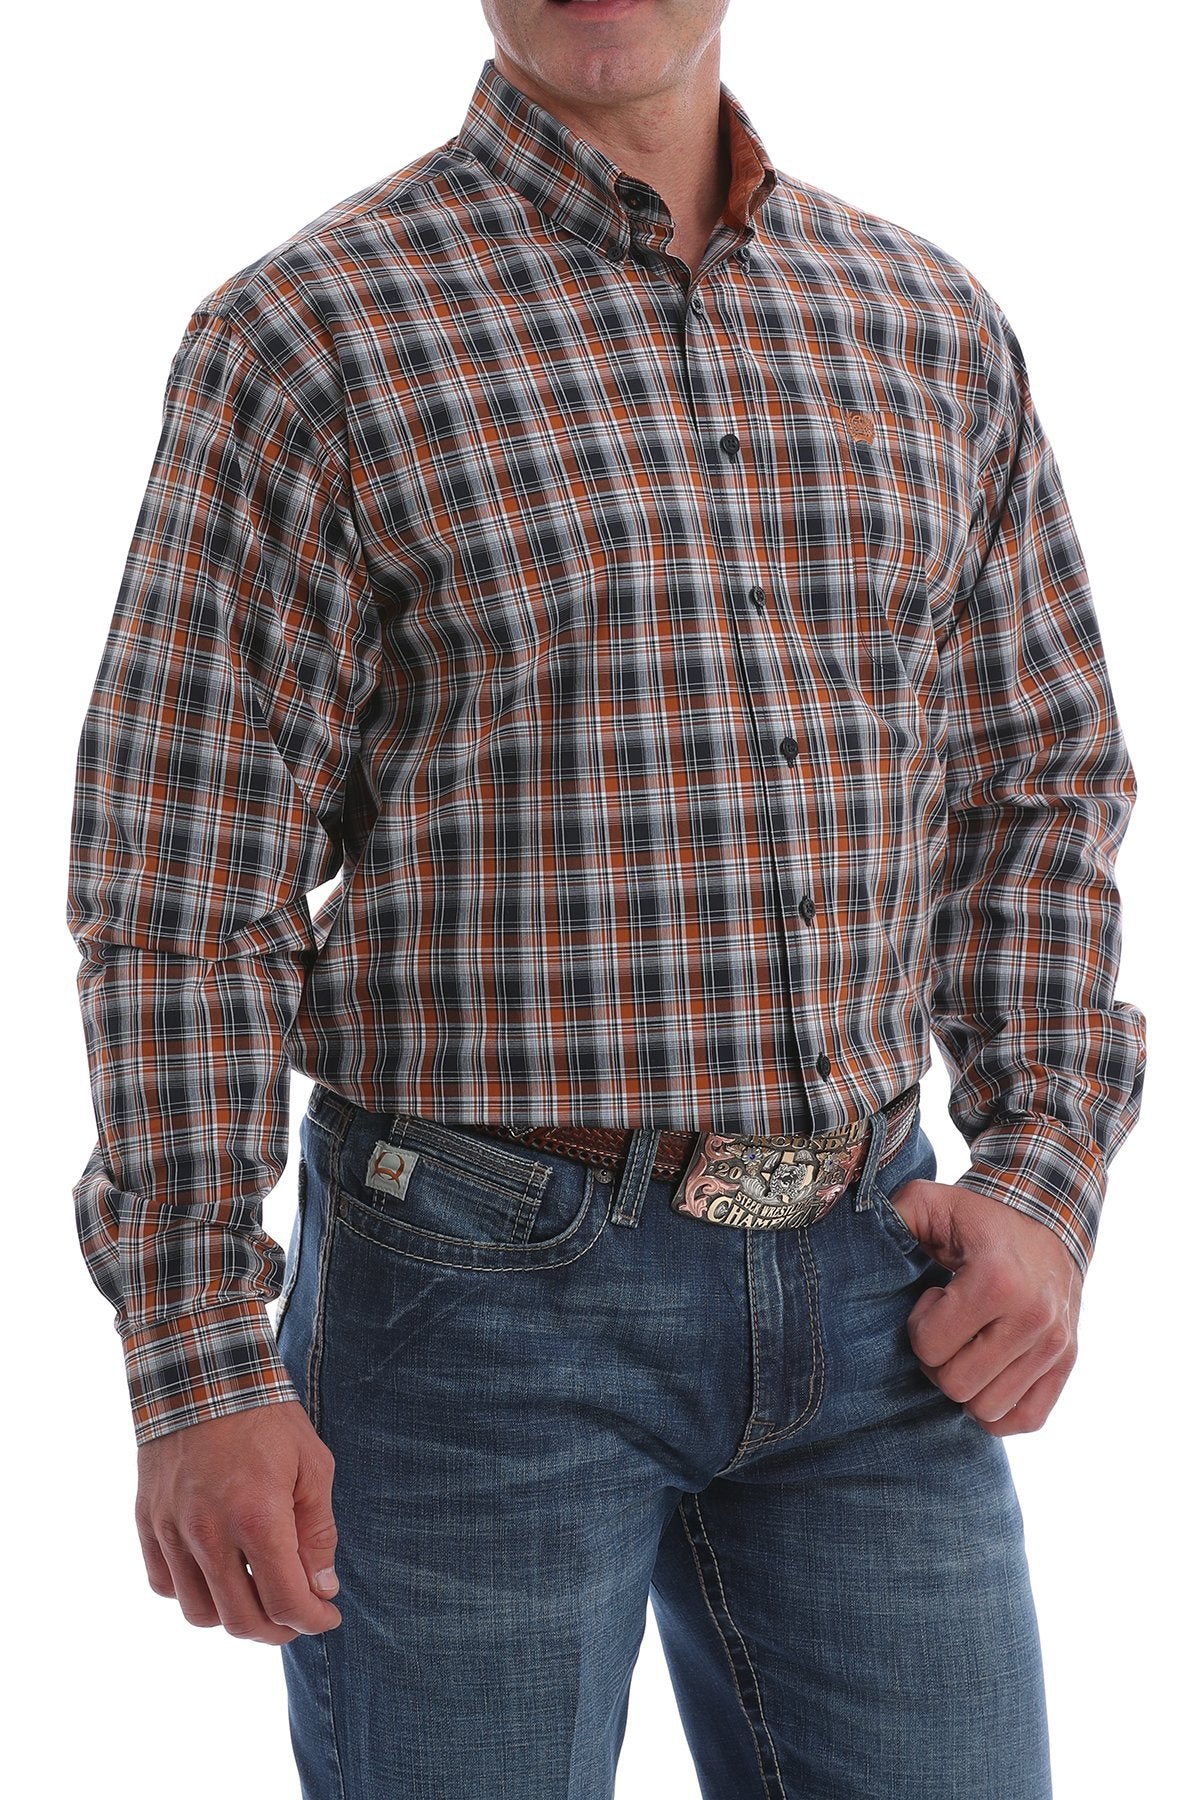 Cinch Navy, Brown and White Plaid L/S Shirt